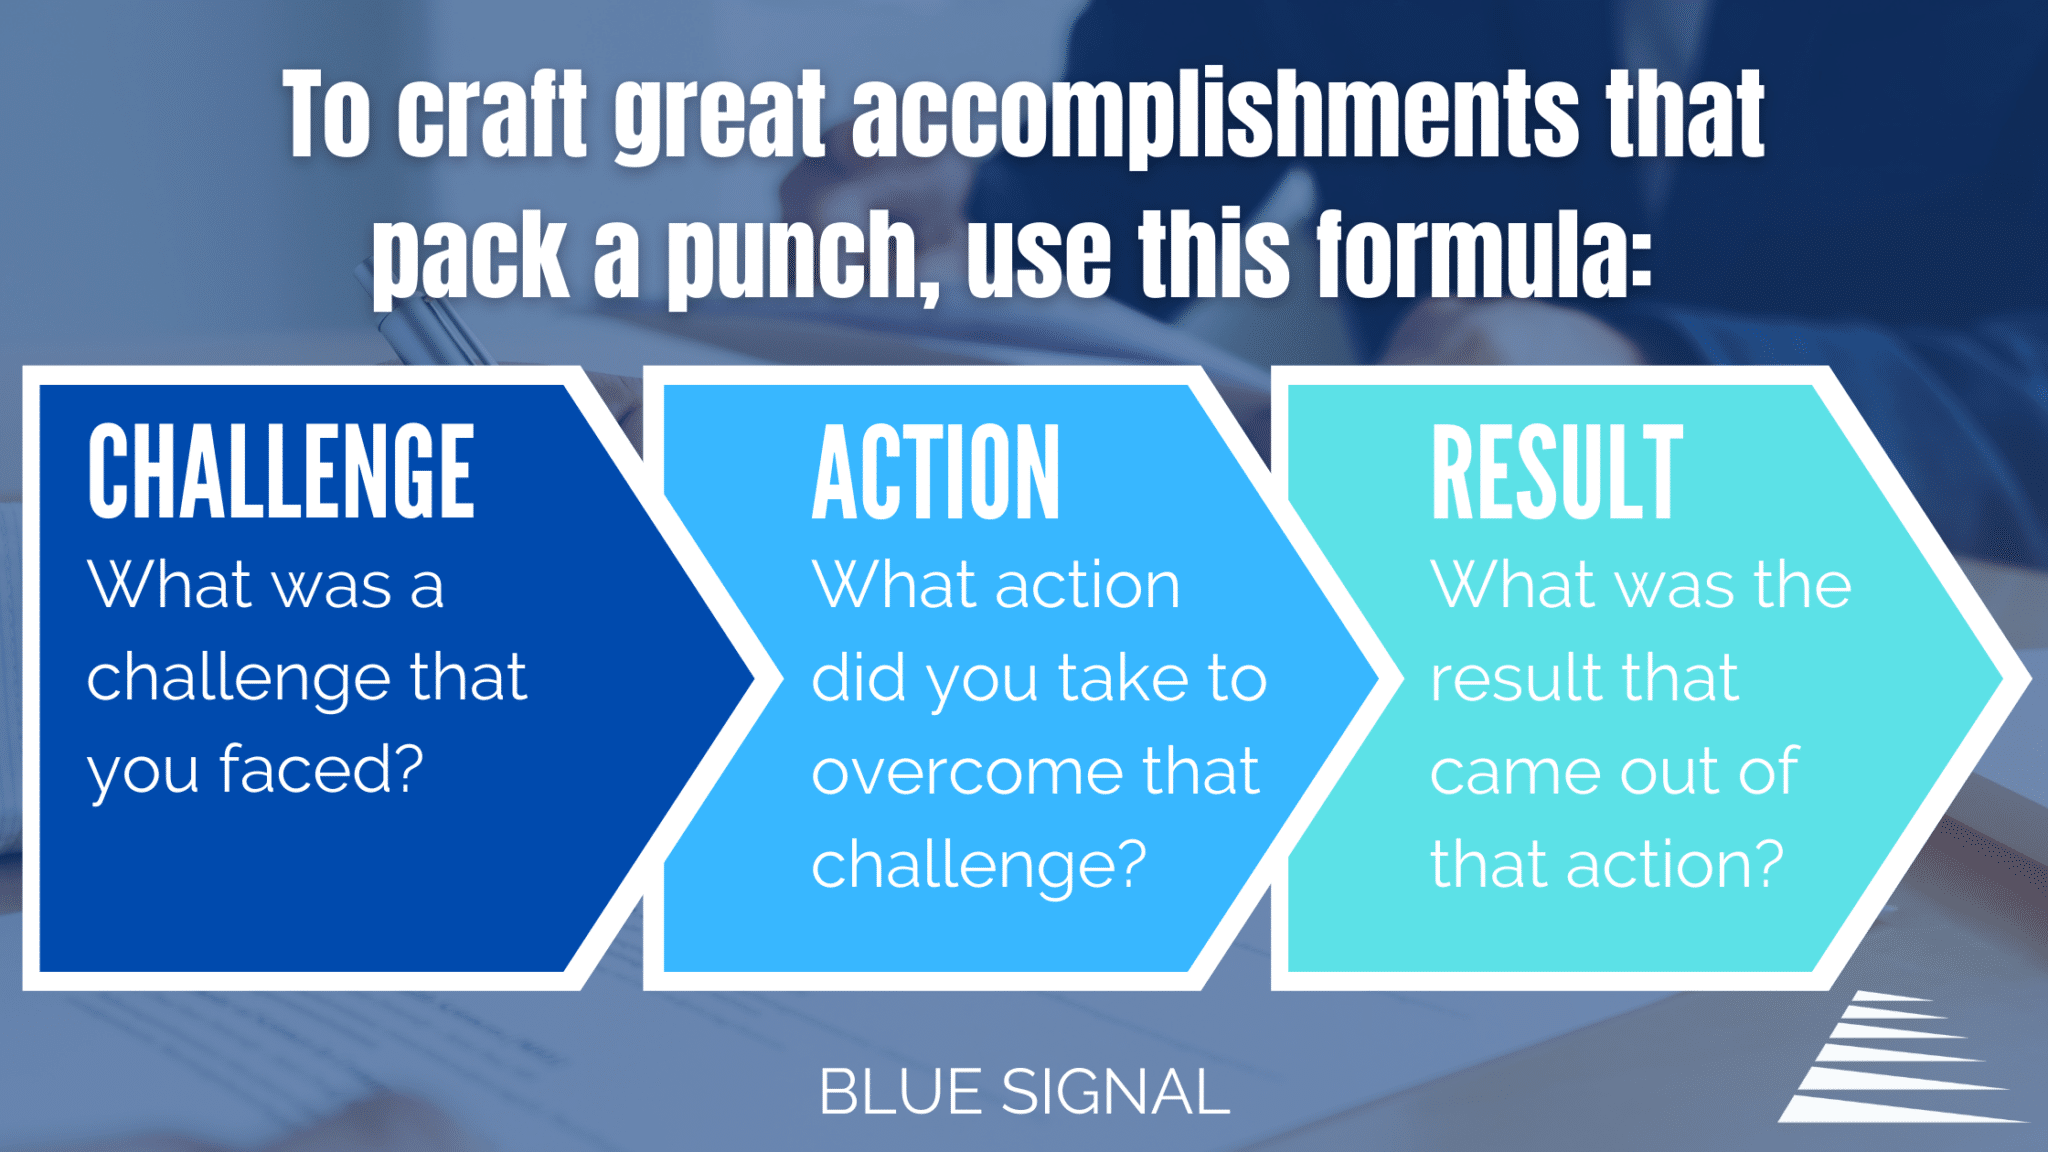 Text stating "o craft great accomplishments that pack a punch, use this formula" following by a flow chart with three elements containg text.